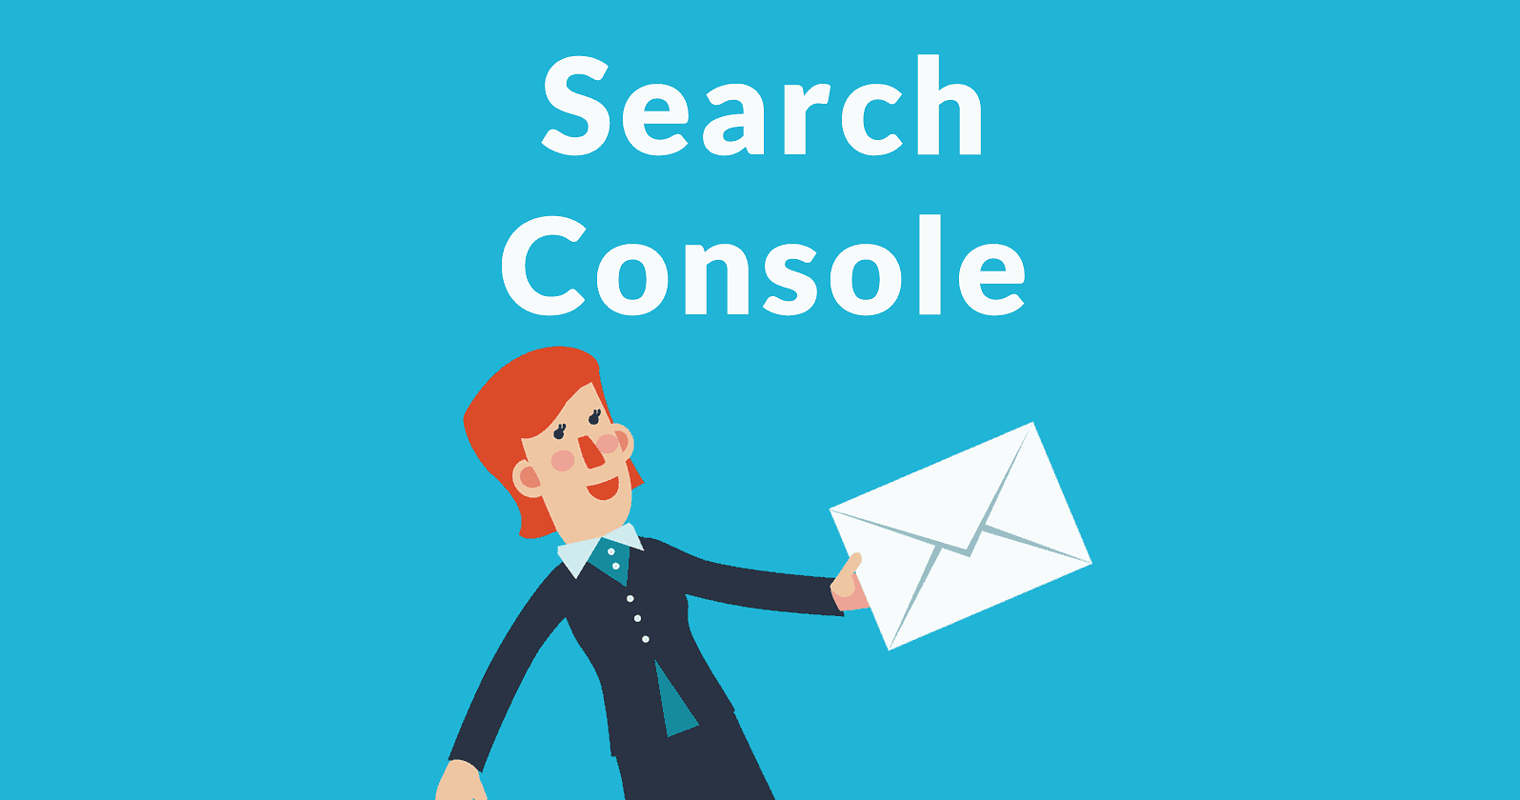 New Google Search Console Feature – Messages